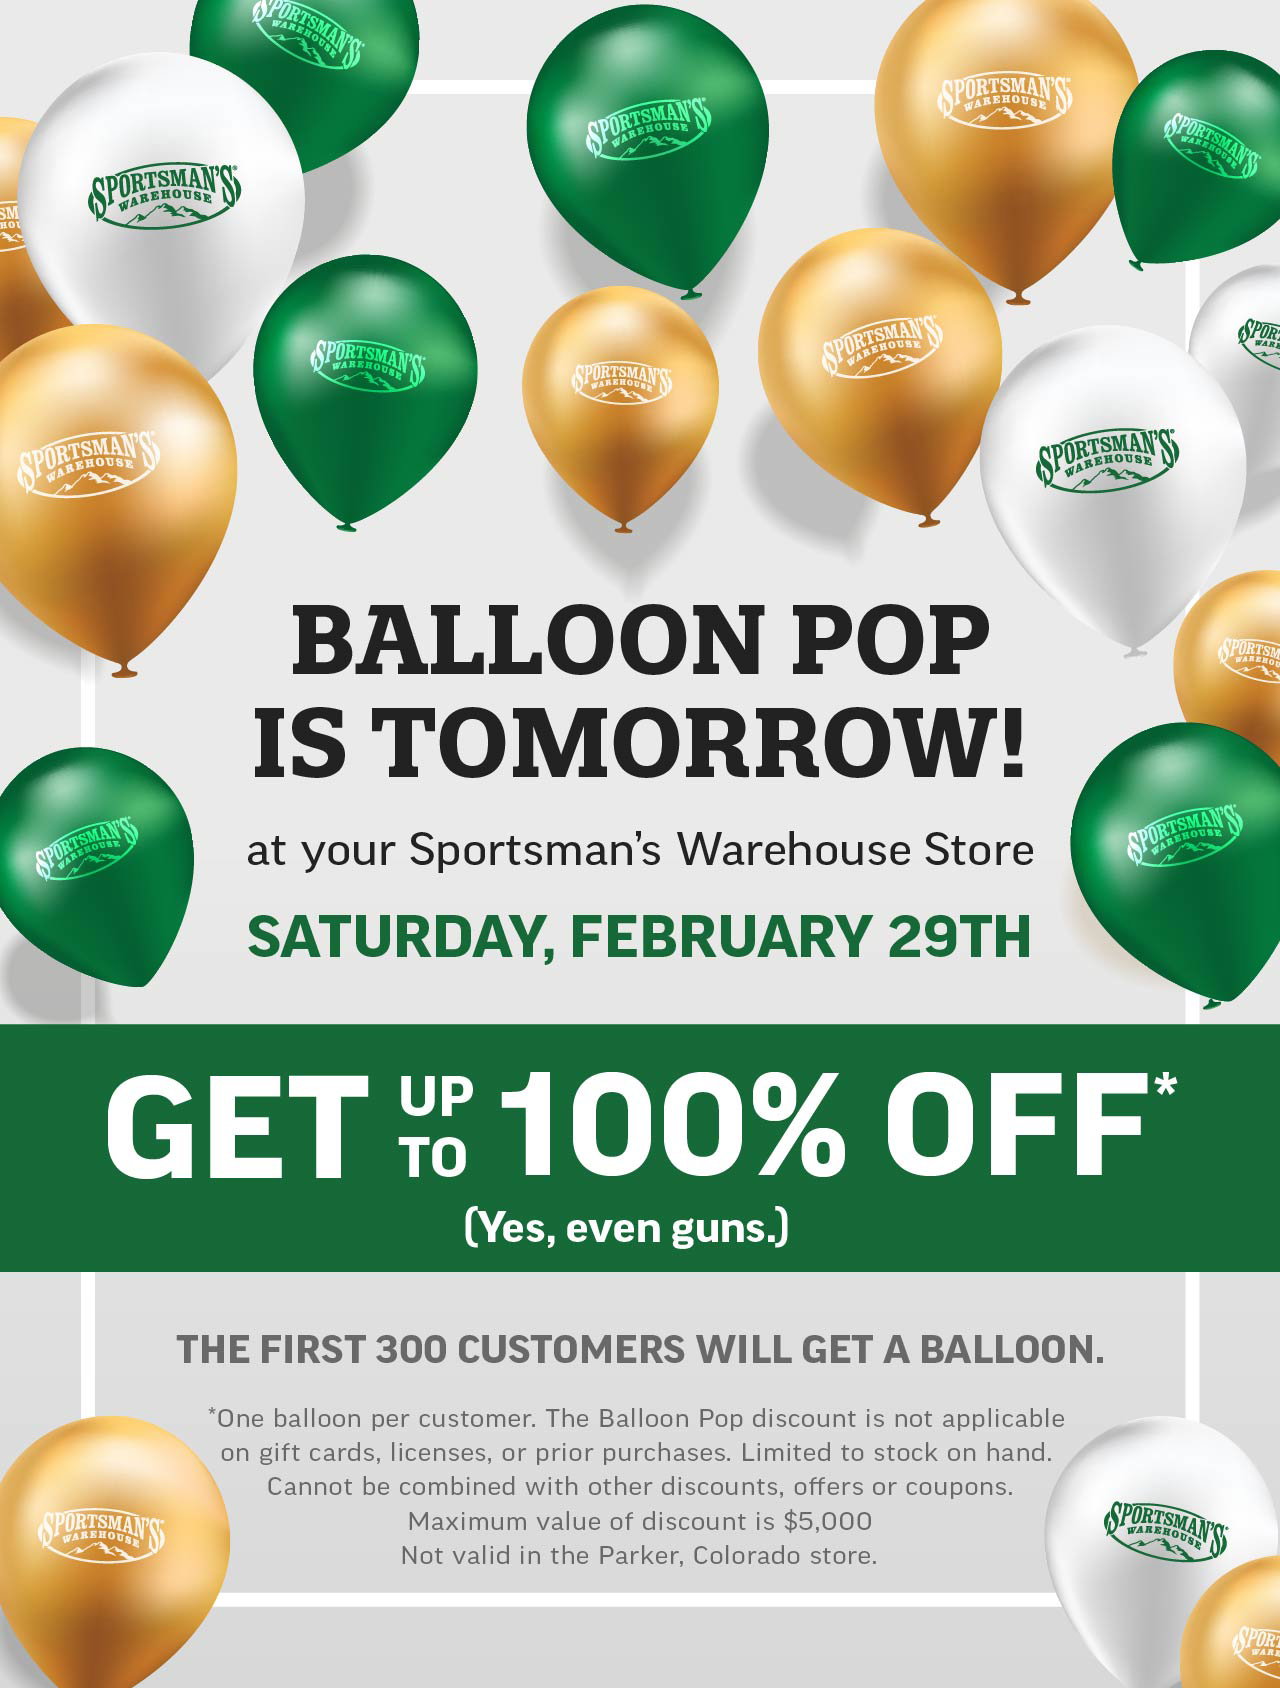 Sportsman's Warehouse Save up to 100 in our Balloon Pop celebration